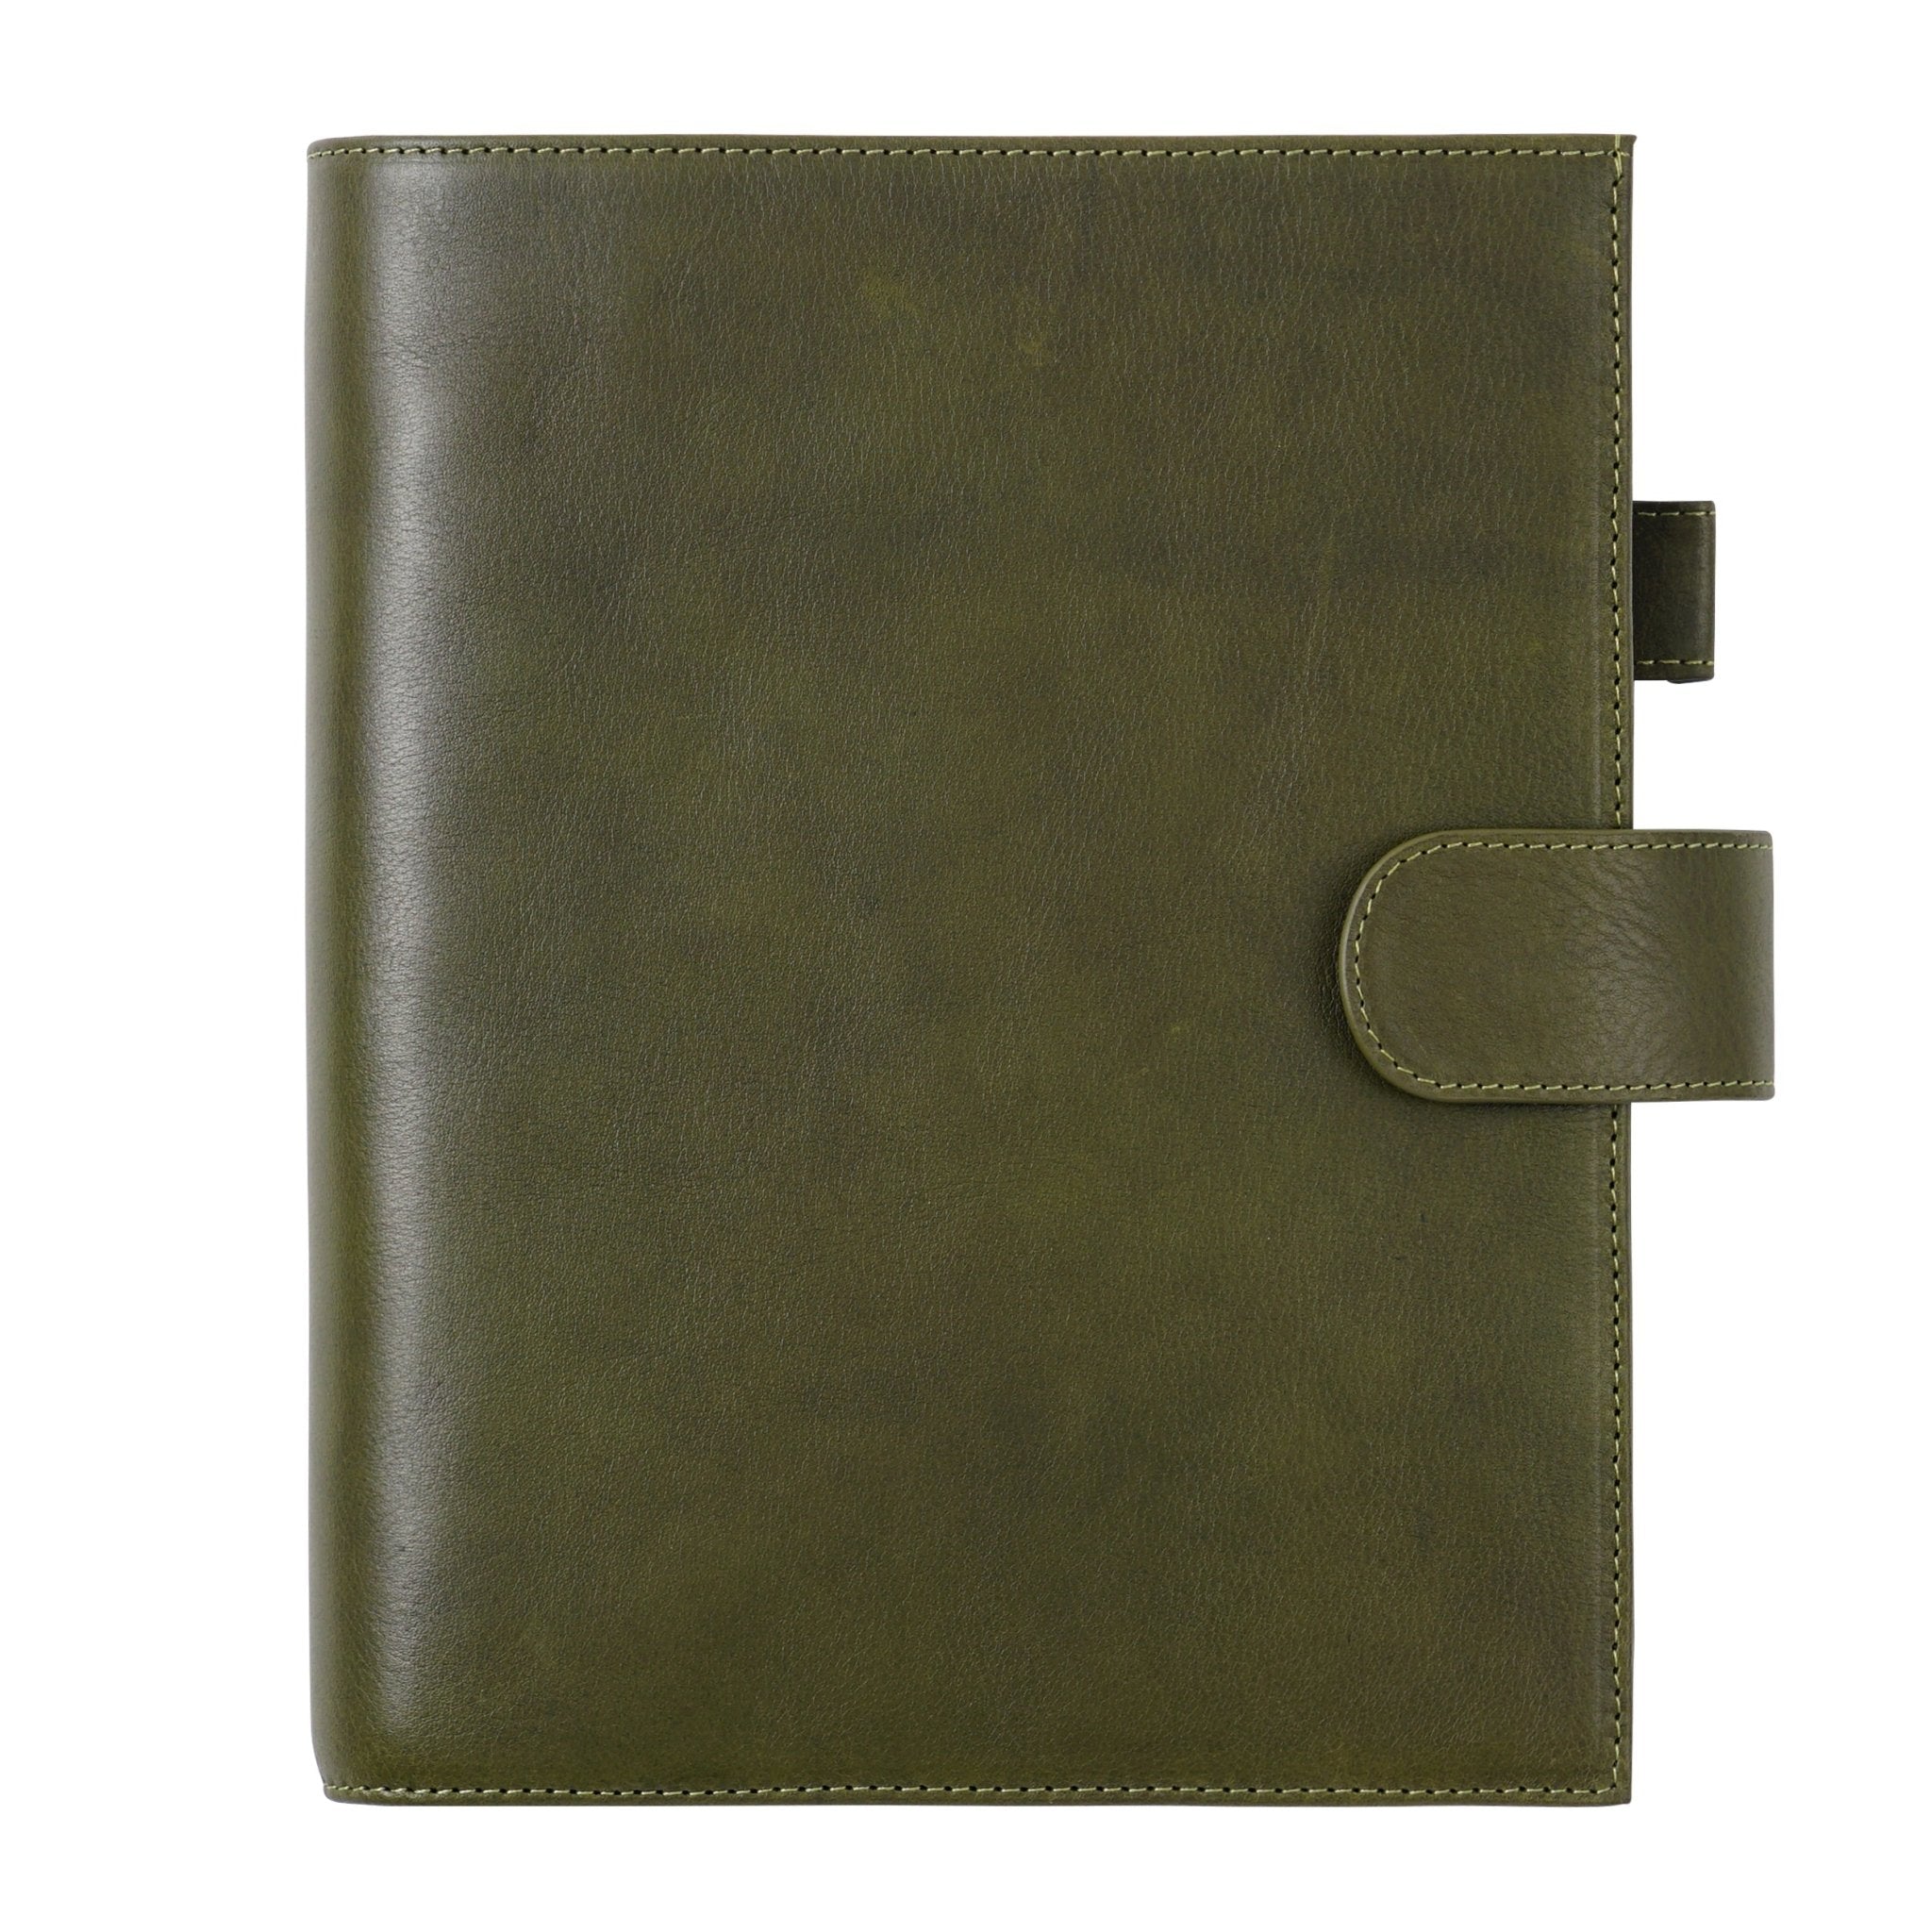 Moterm Discbound Cover - Half Letter/ Junior (Vegetable Tanned Leather